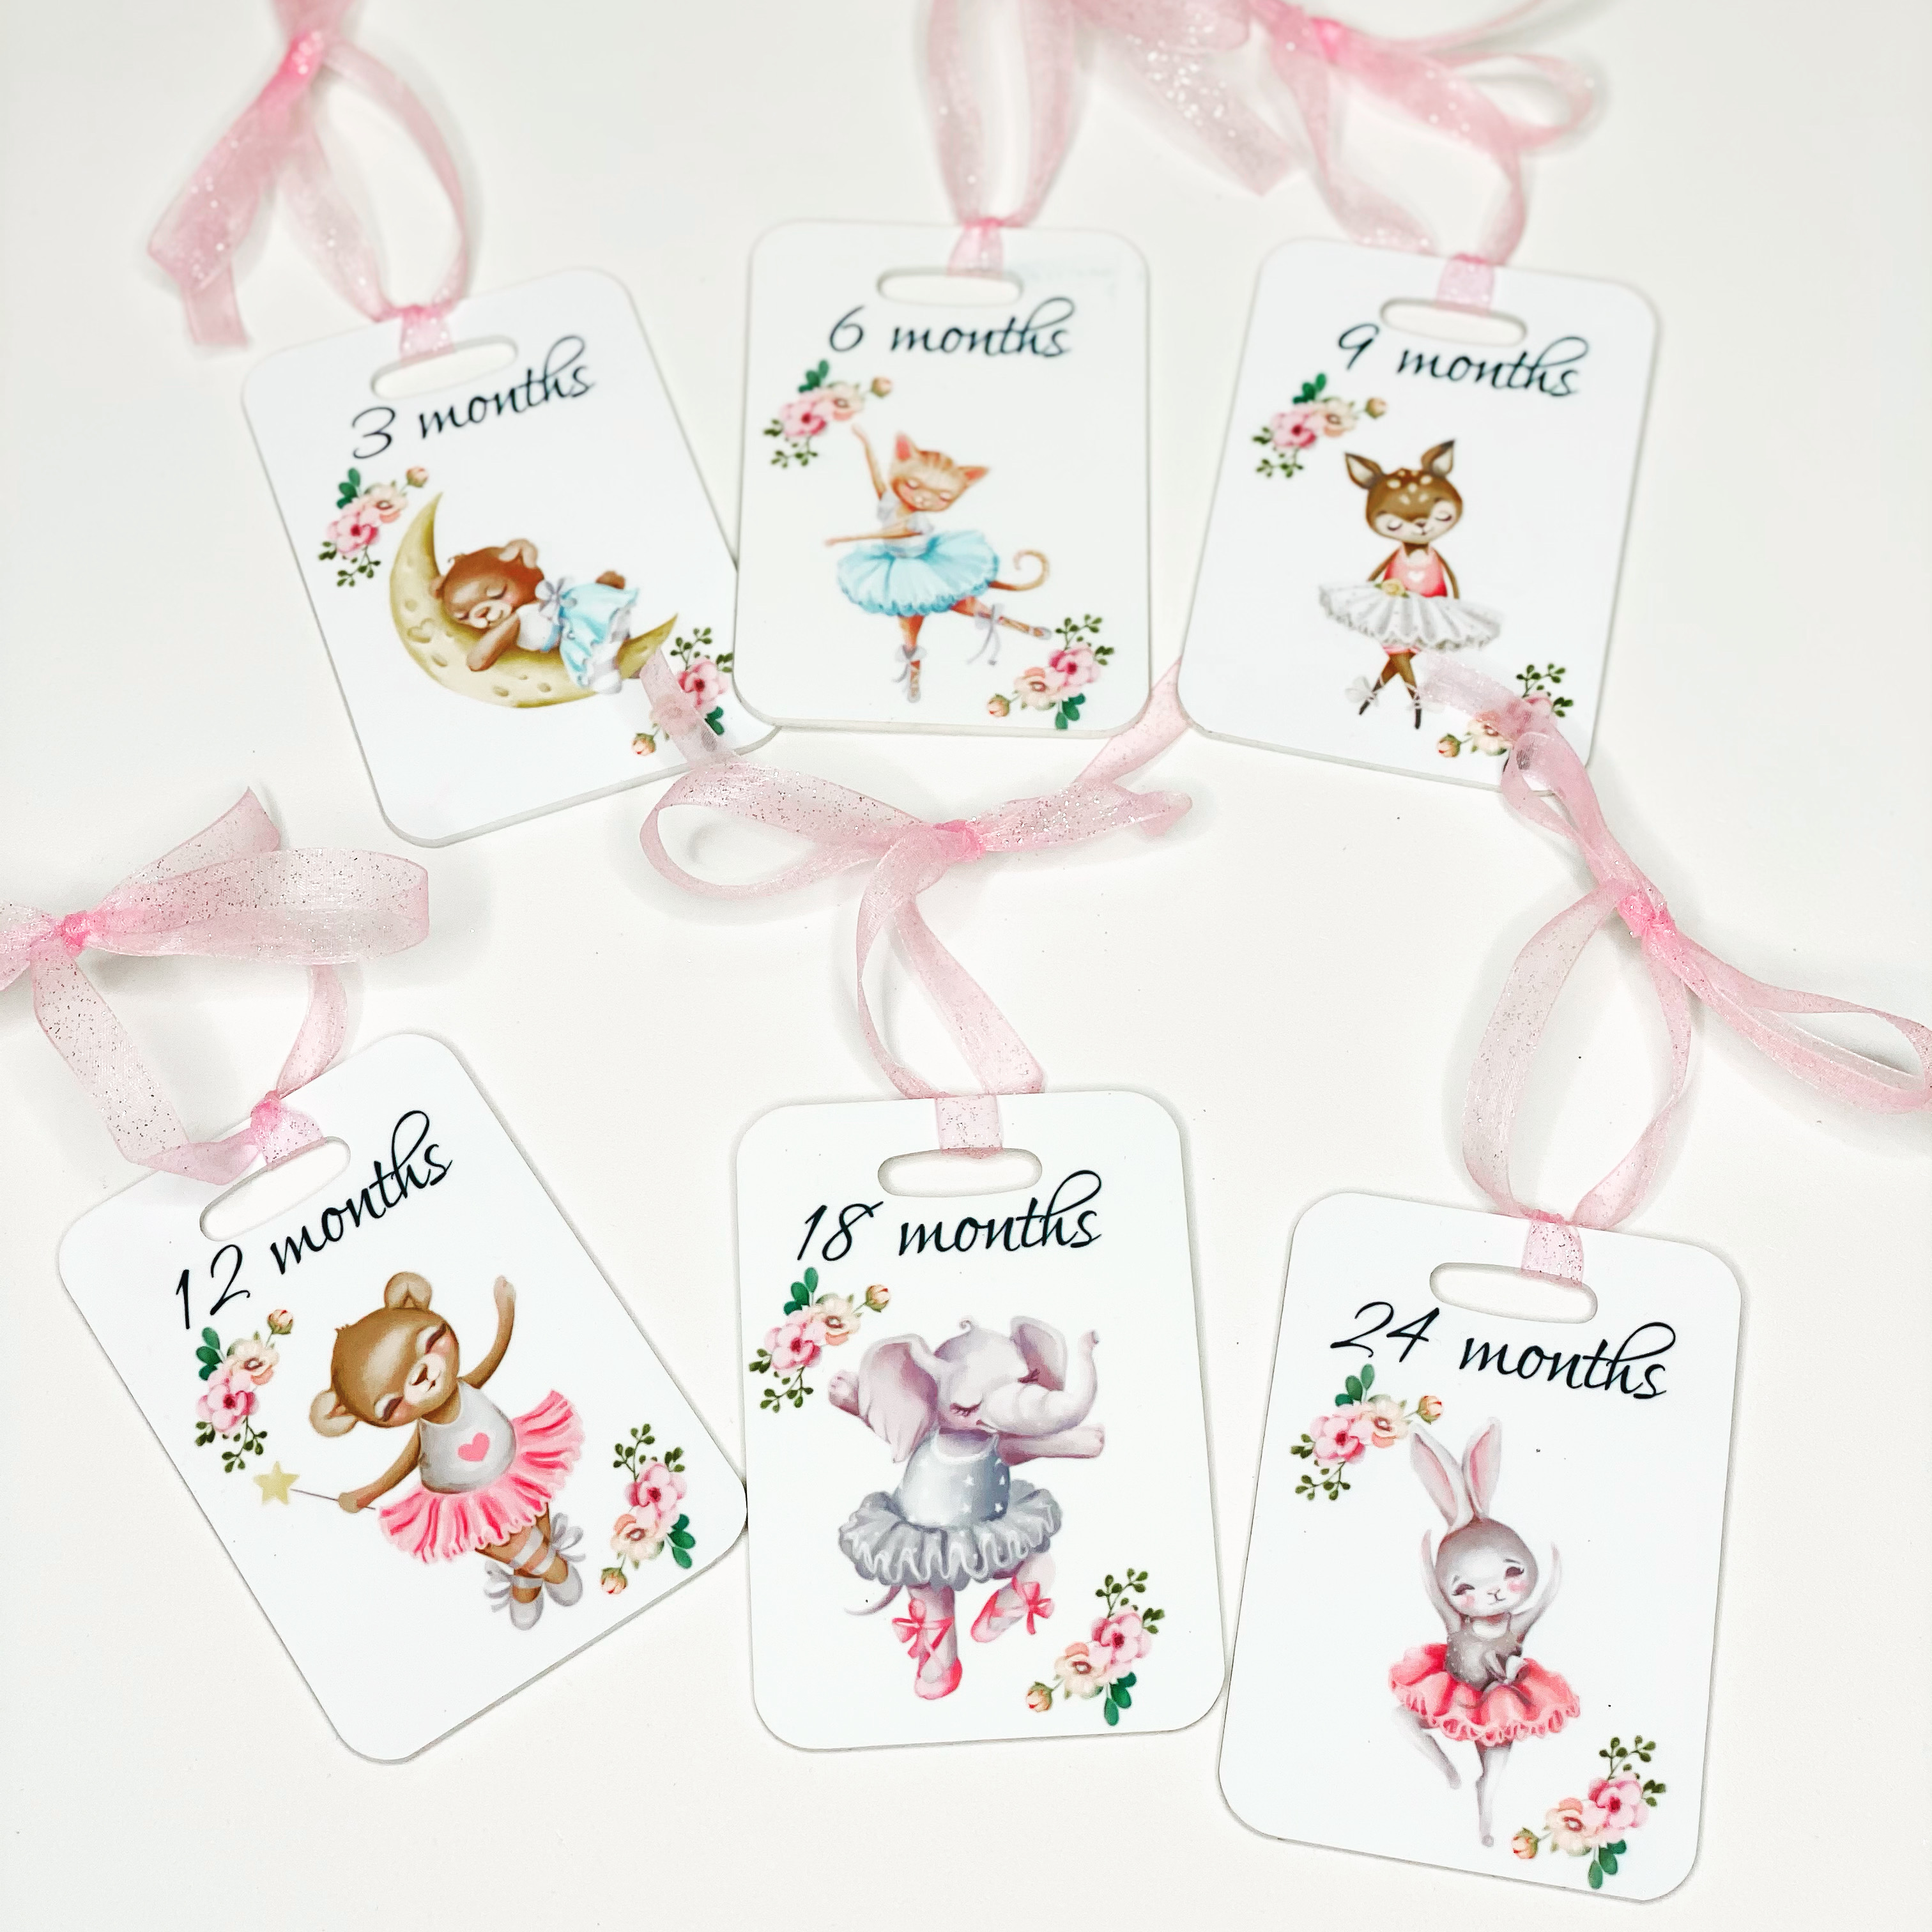 Luggage tag holders turned into closet organizer tags